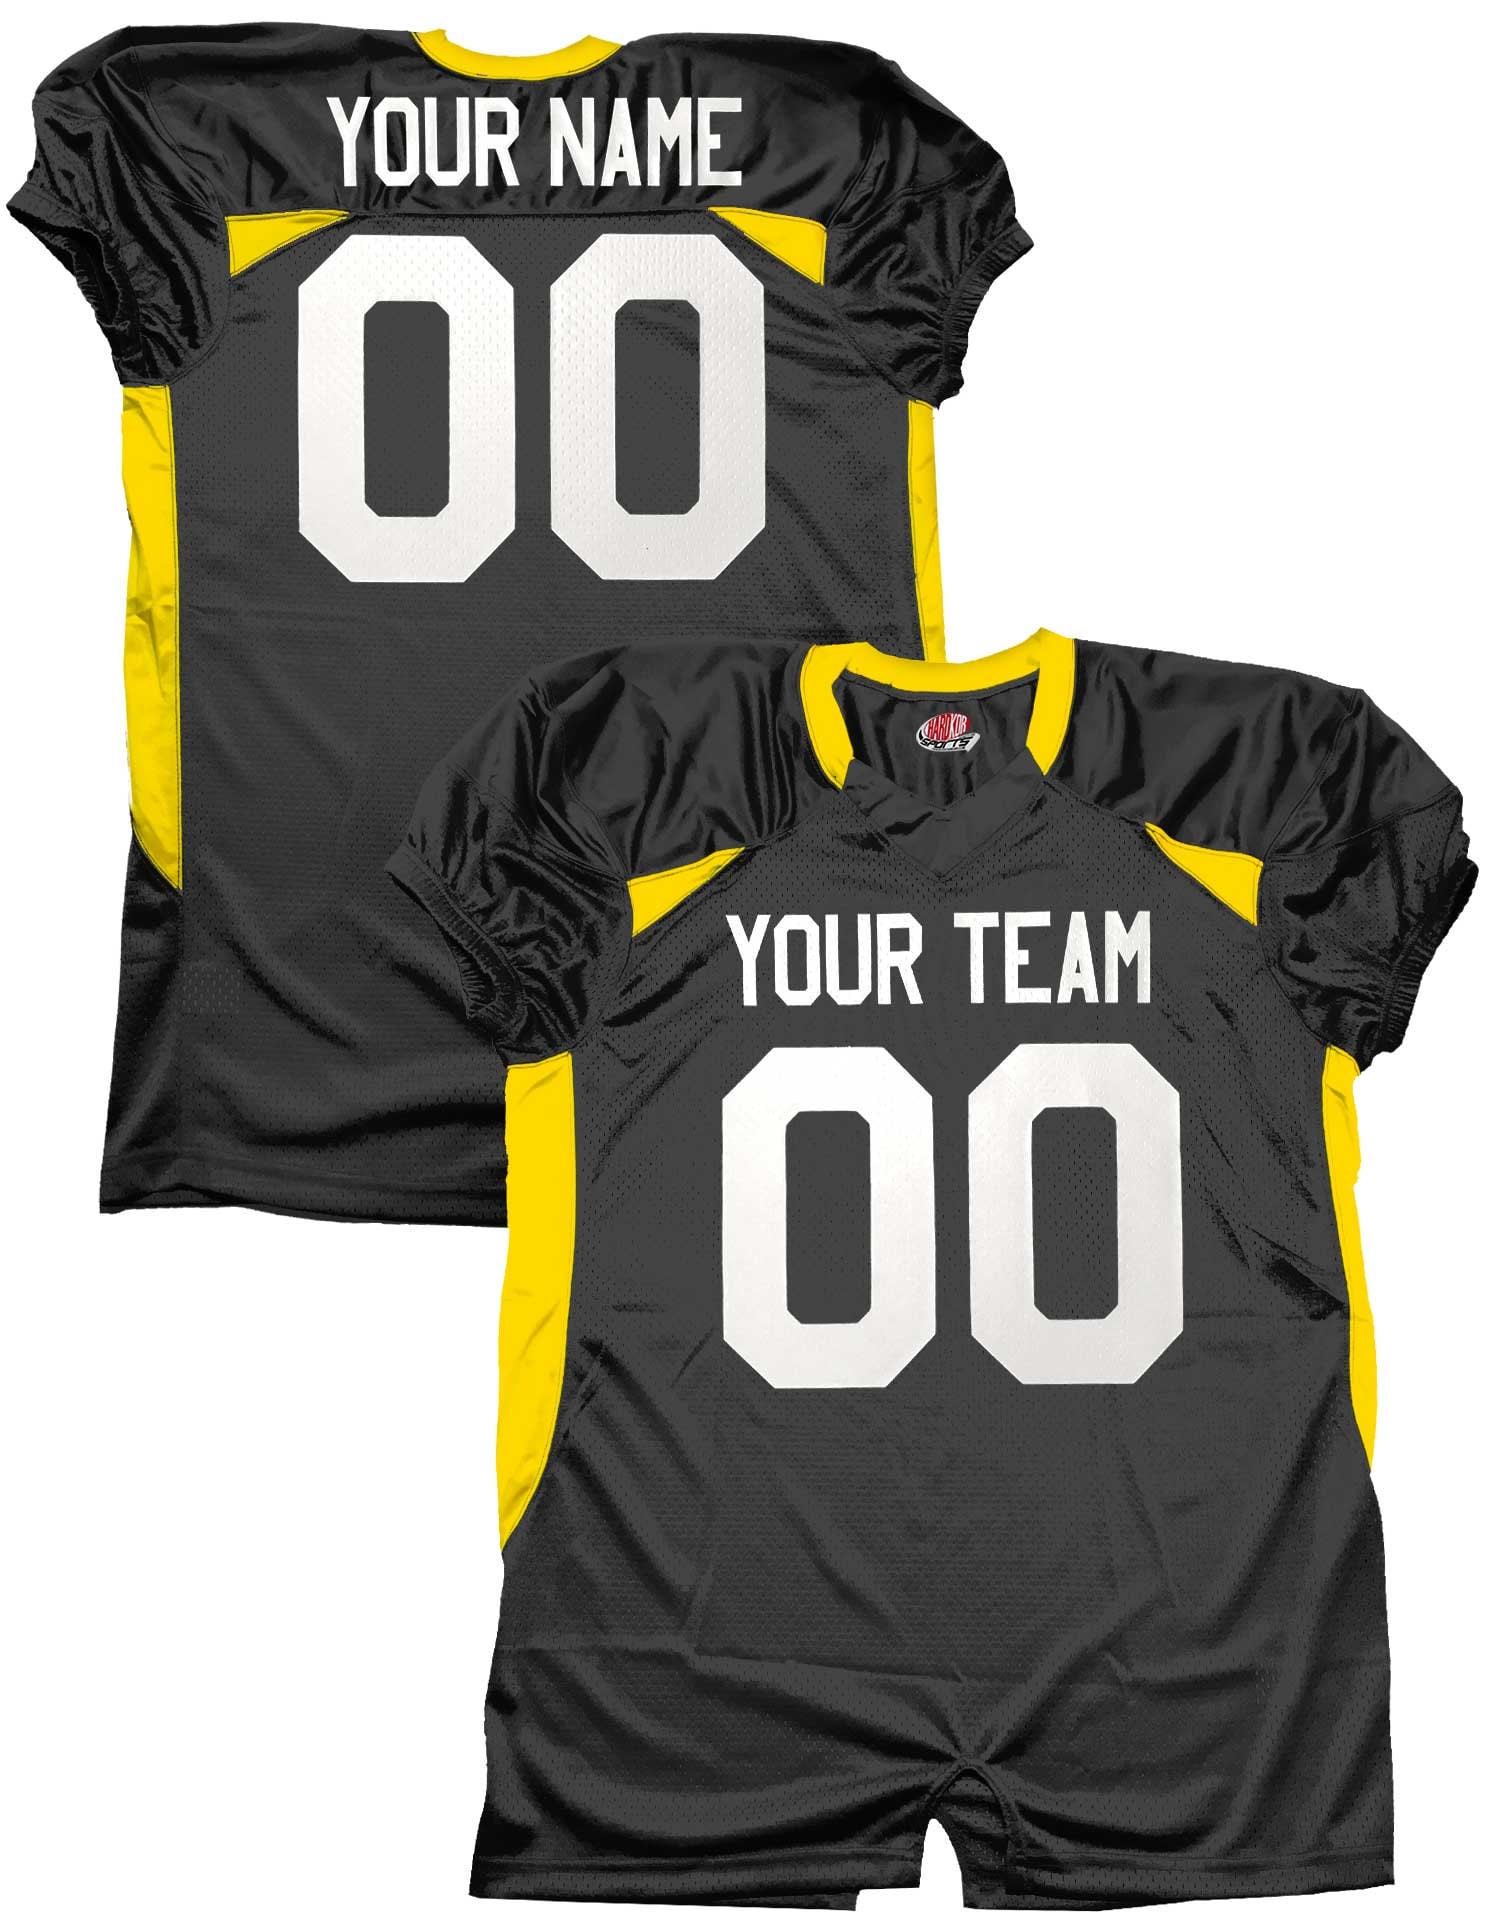 Team Professional Game Fitted Custom Football Jersey, Black, Navy, Gold, Stretch Mesh, Dazzle, SPANDEX, Team Name, Player Name and Numbers